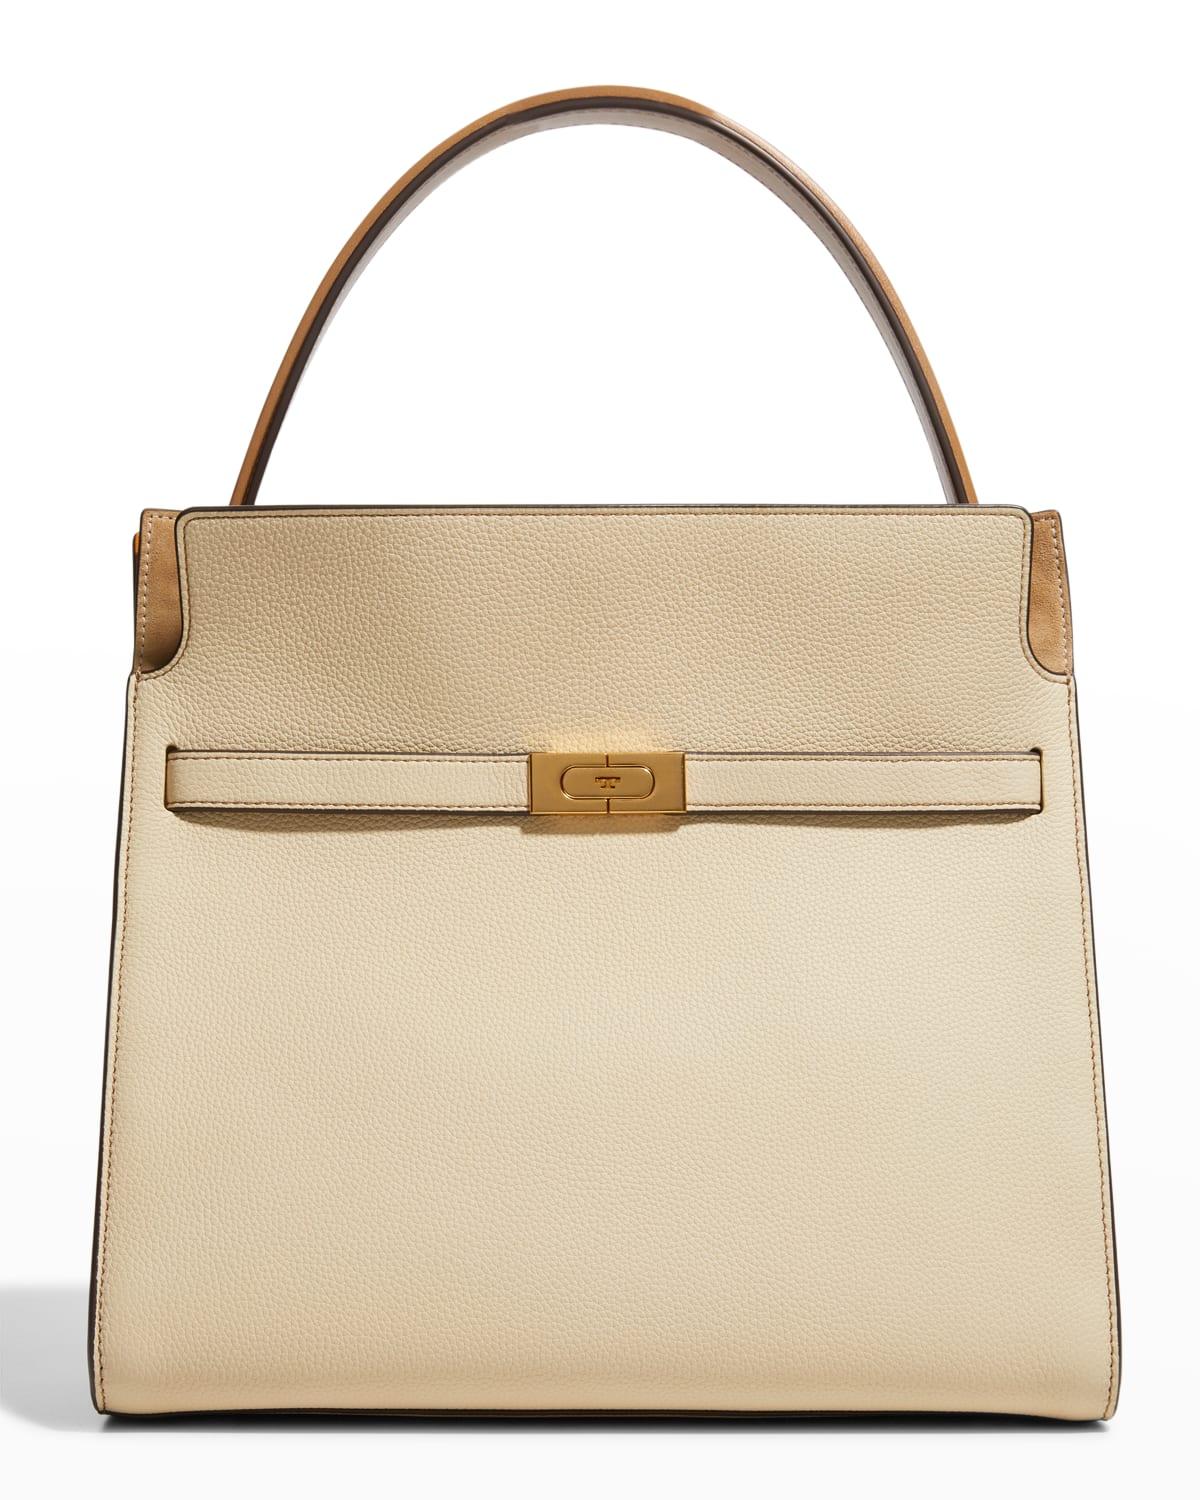 Tory Burch Lee Radziwill Pebbled Leather Double Bag in Natural | Lyst